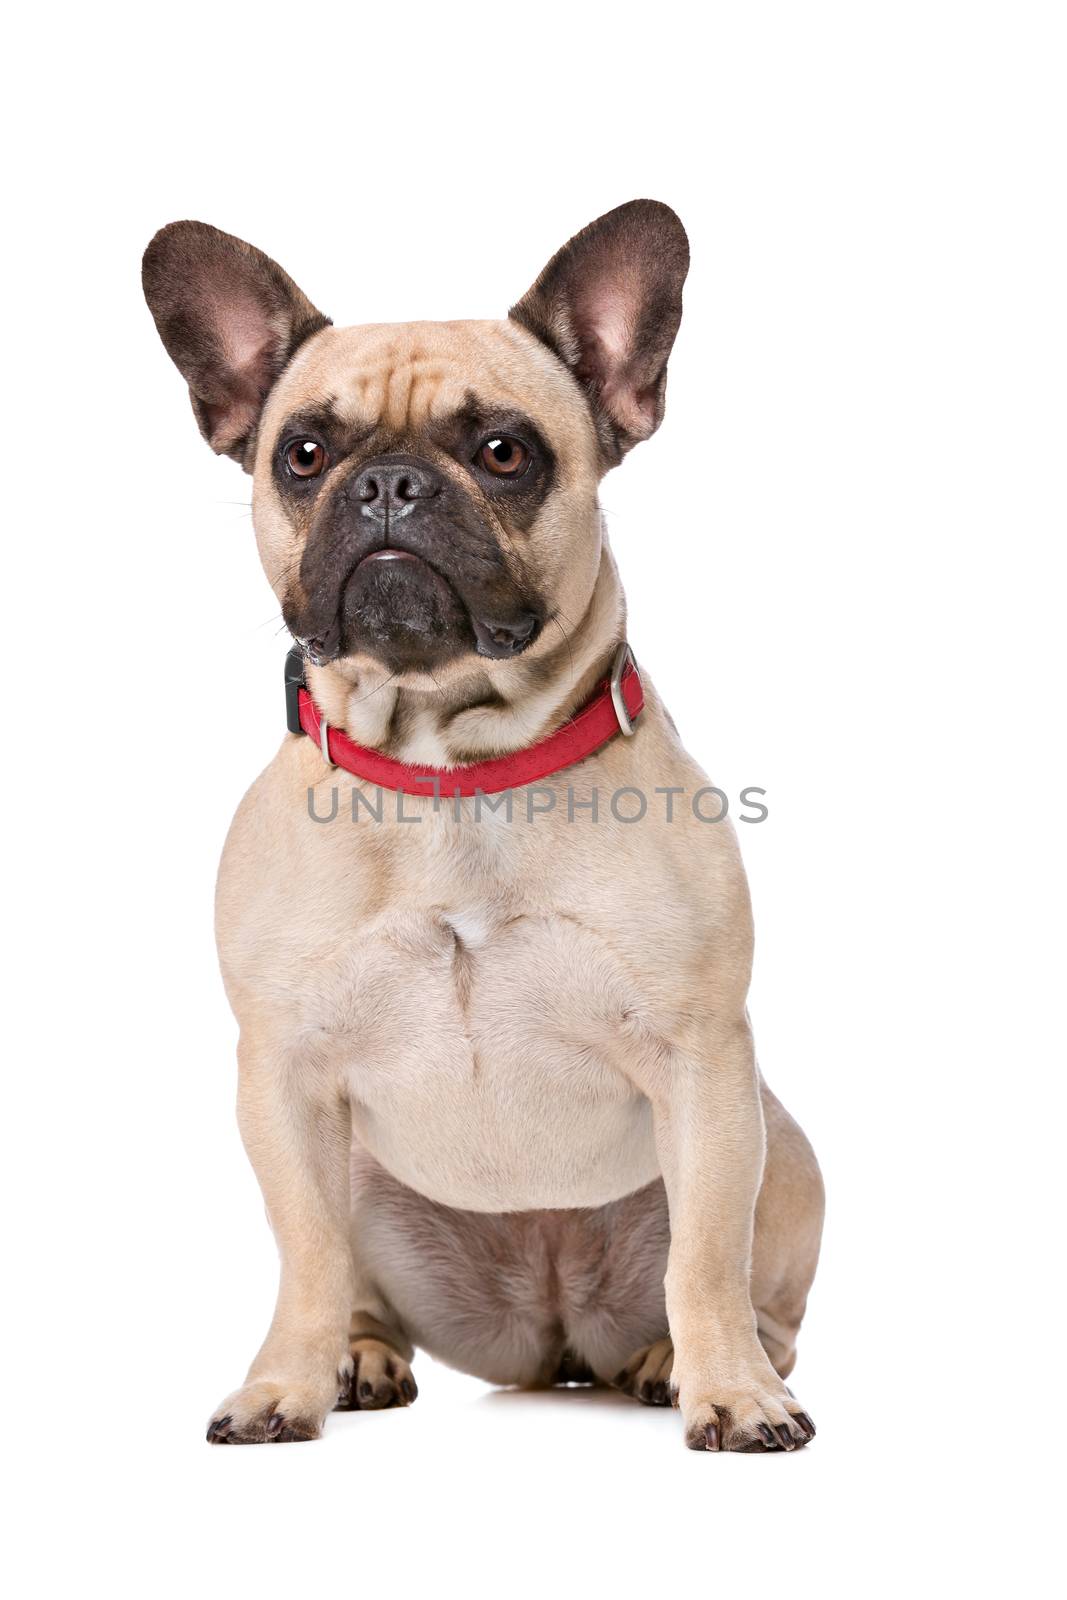 Brown French Bulldog sitting in front of a white background